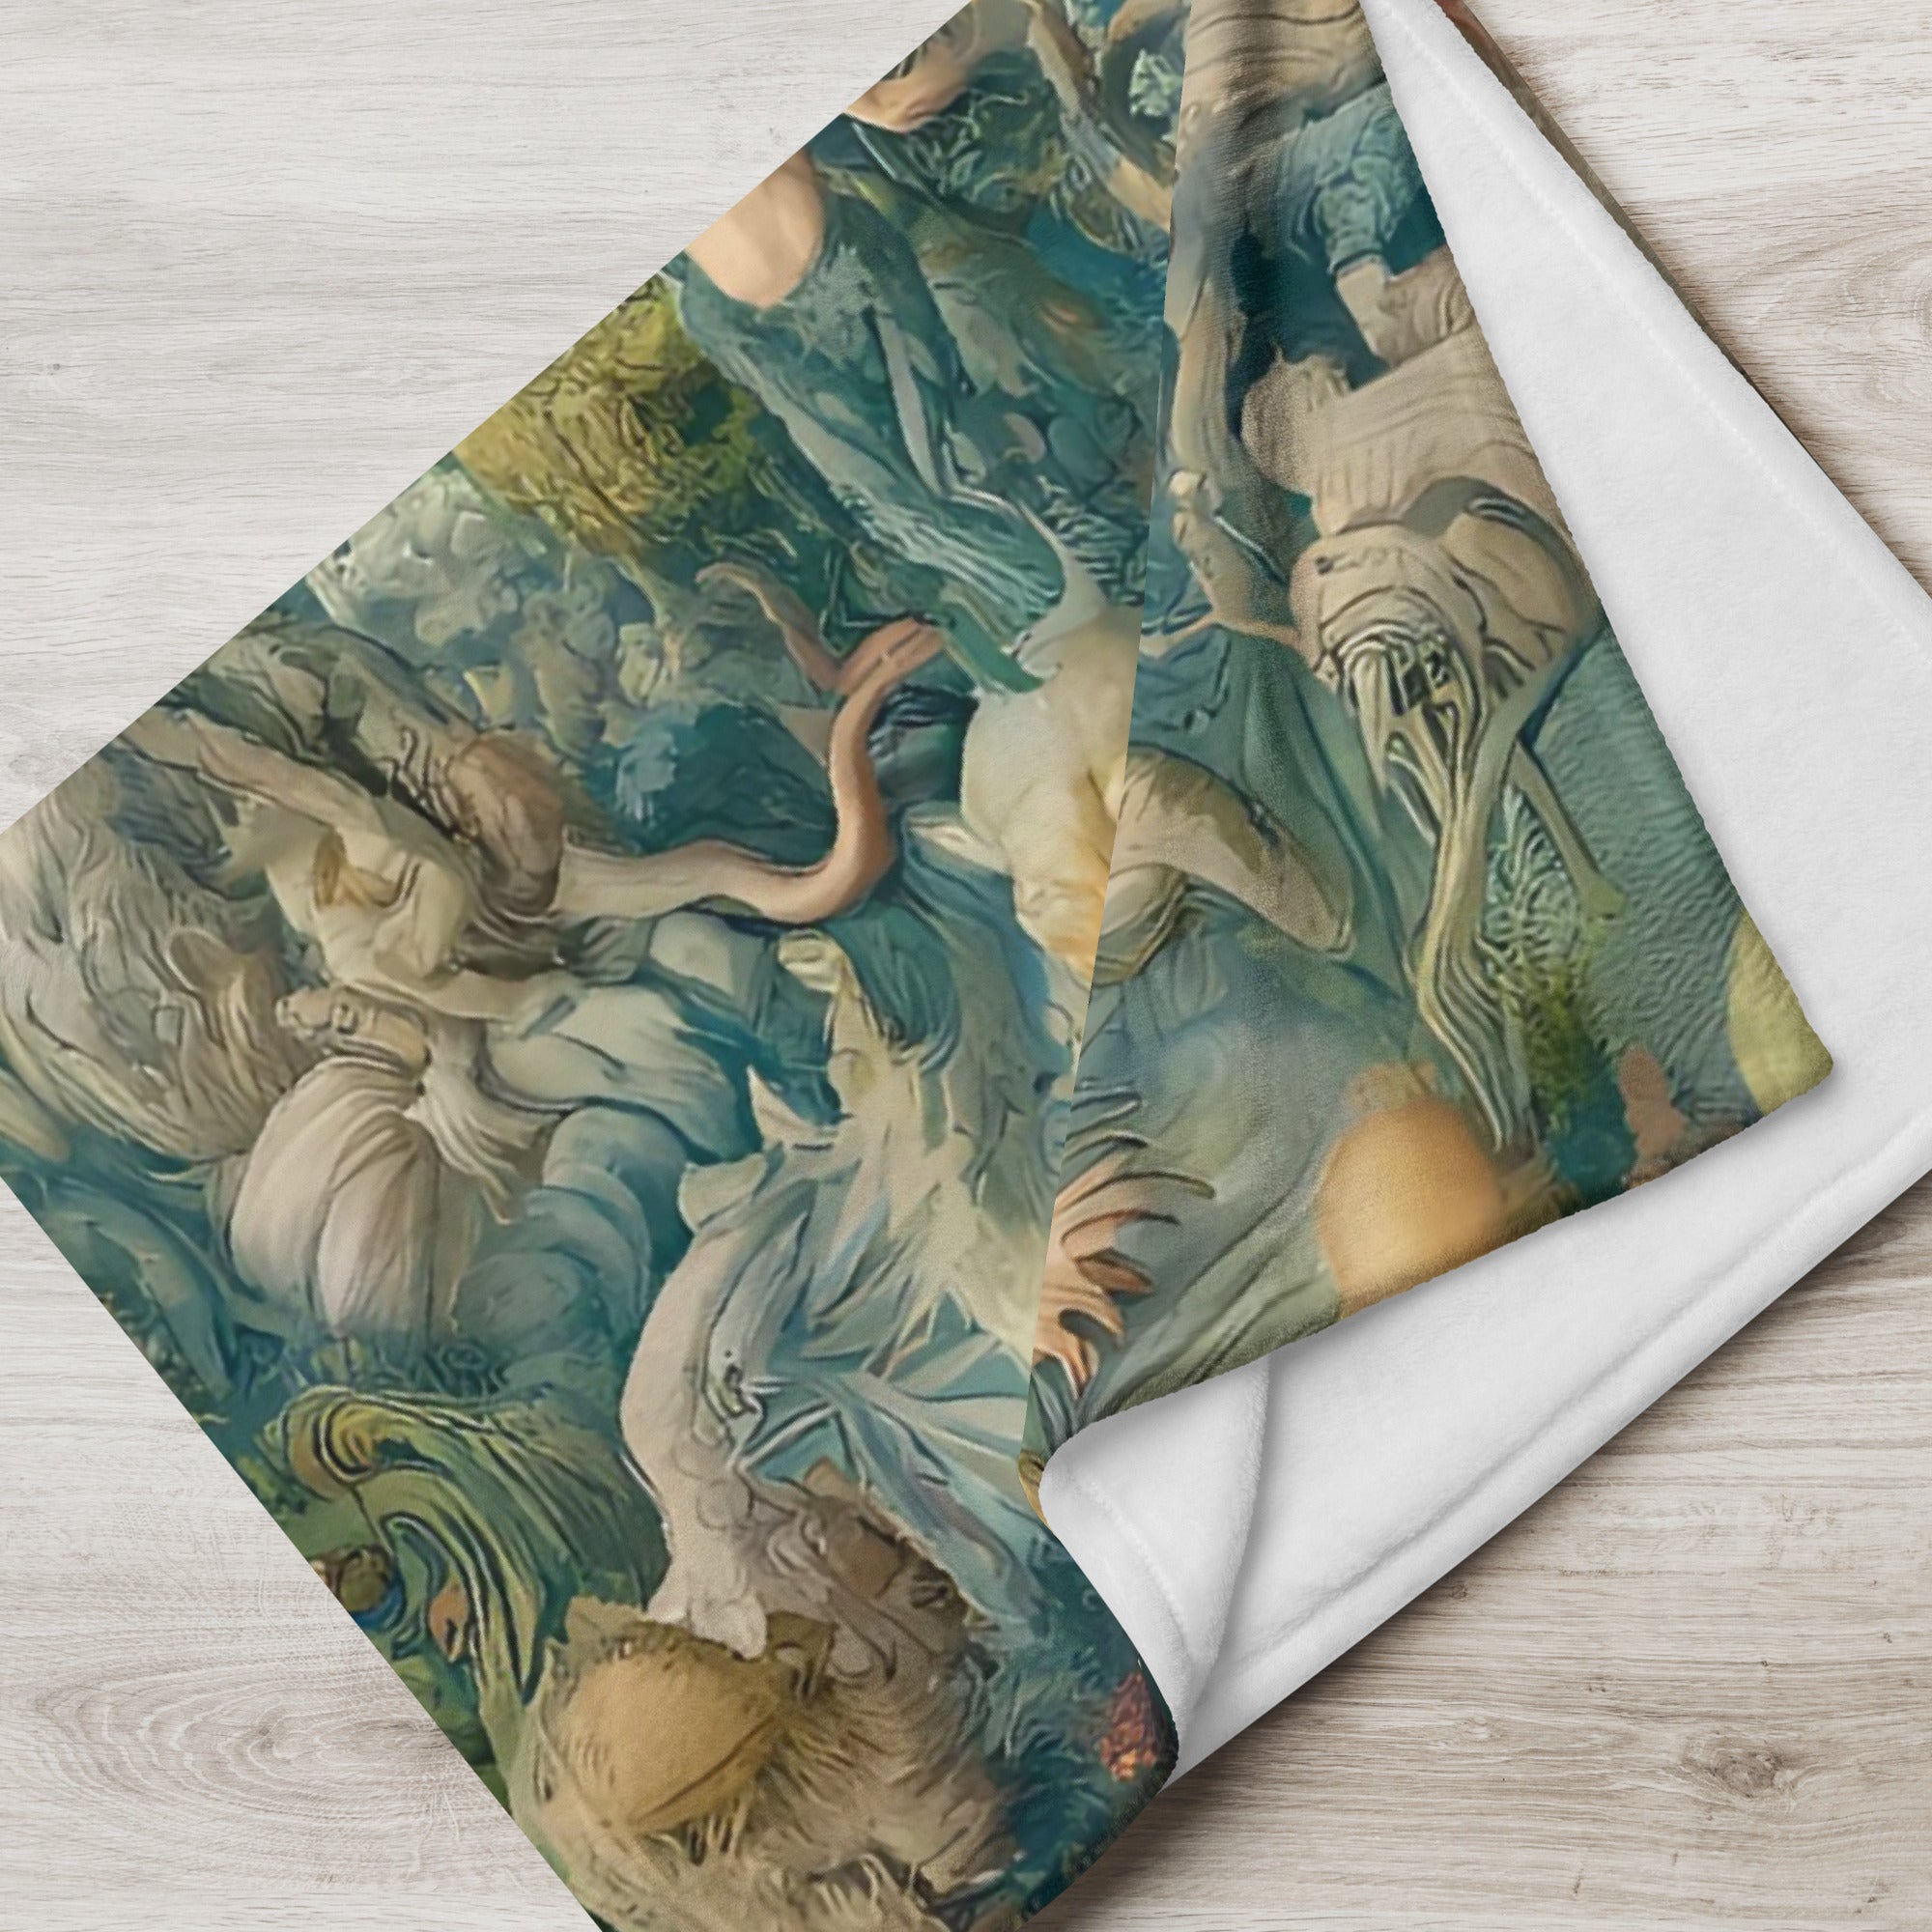 Hieronymus Bosch 'The Garden of Earthly Delights' Famous Painting Throw Blanket | Premium Art Throw